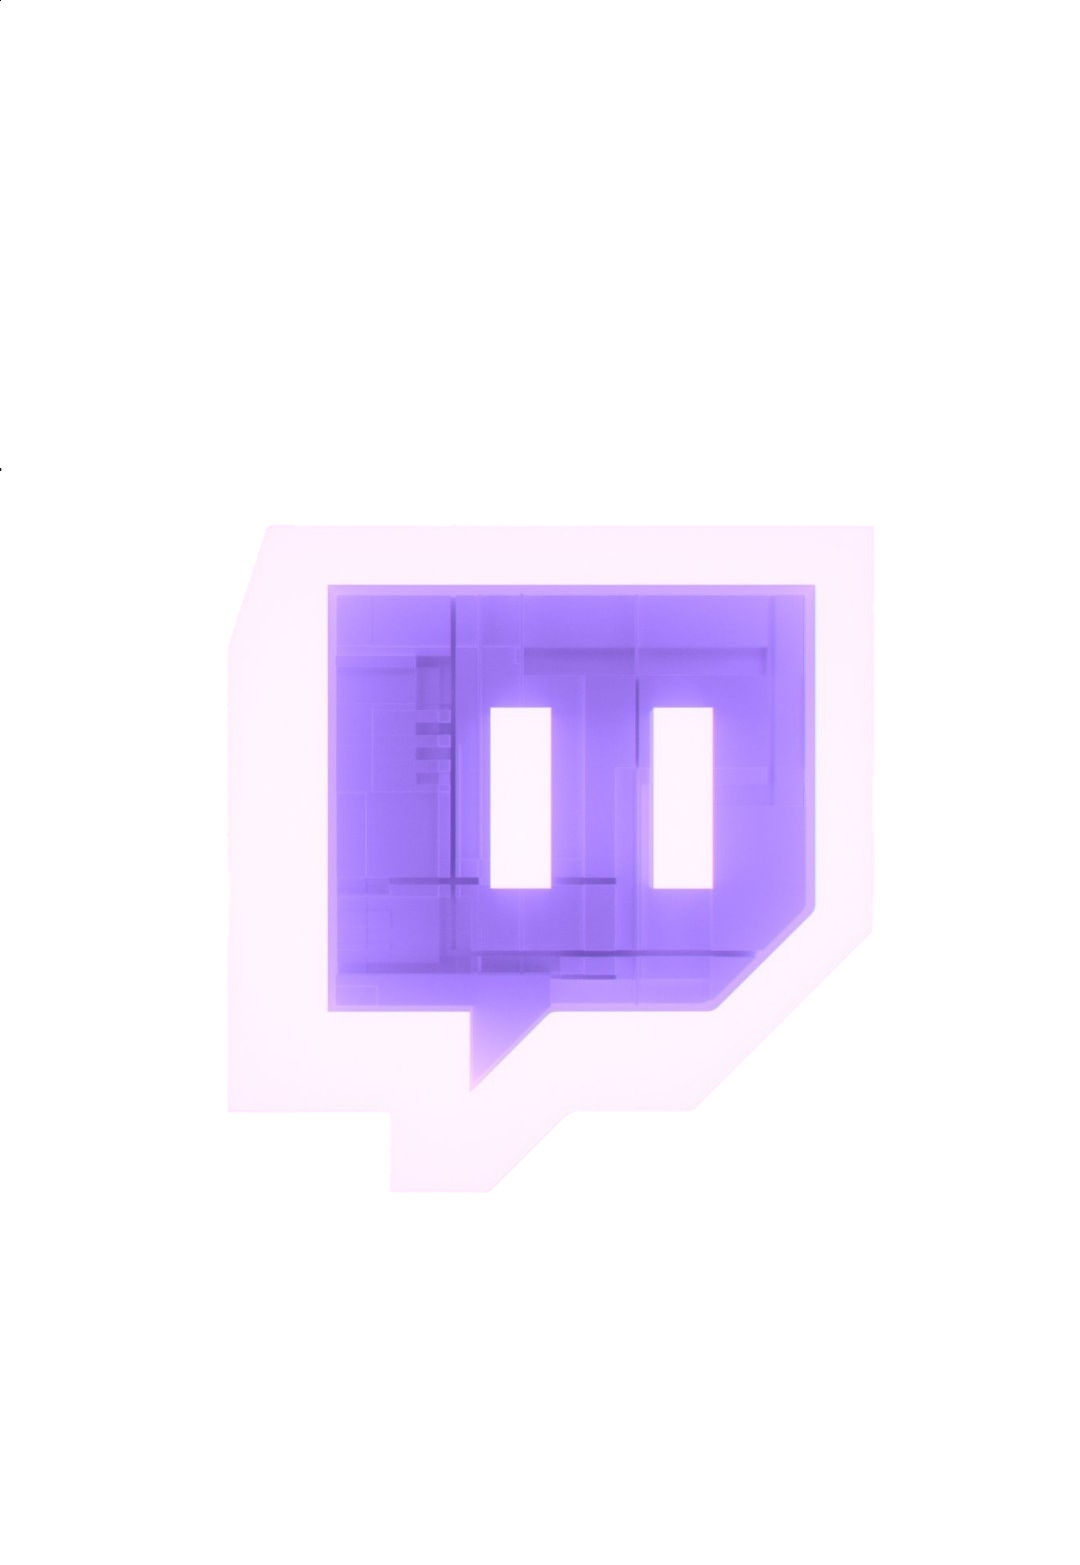 twitch-logo-png-from-pngfre-20